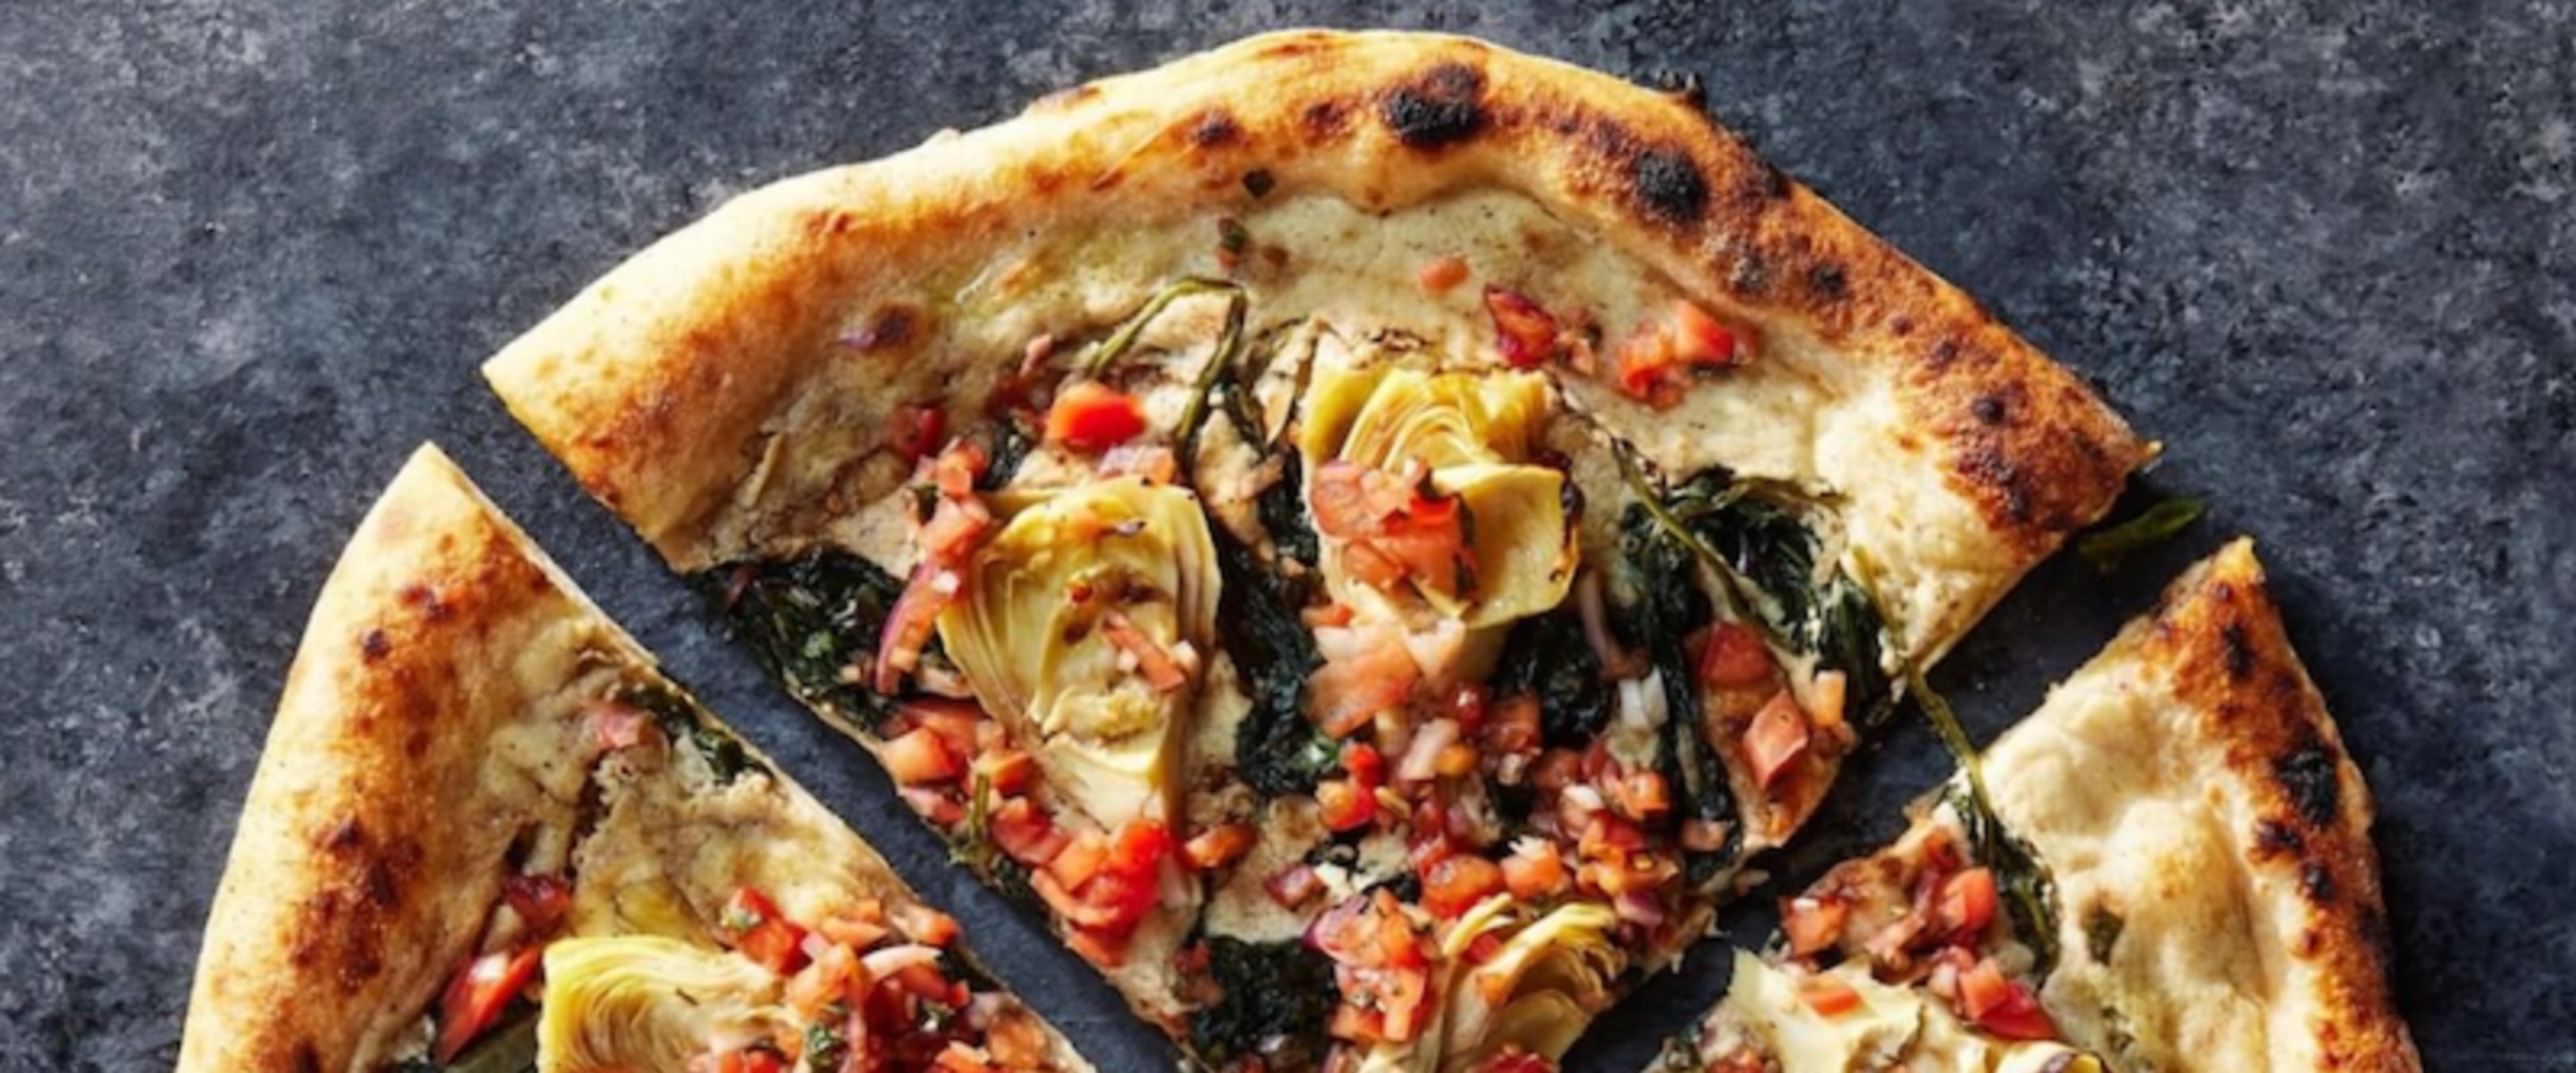 Vegan Food Near Me: From Detroit to New York-Style, 10 Vegan Pizzas You Have to Try